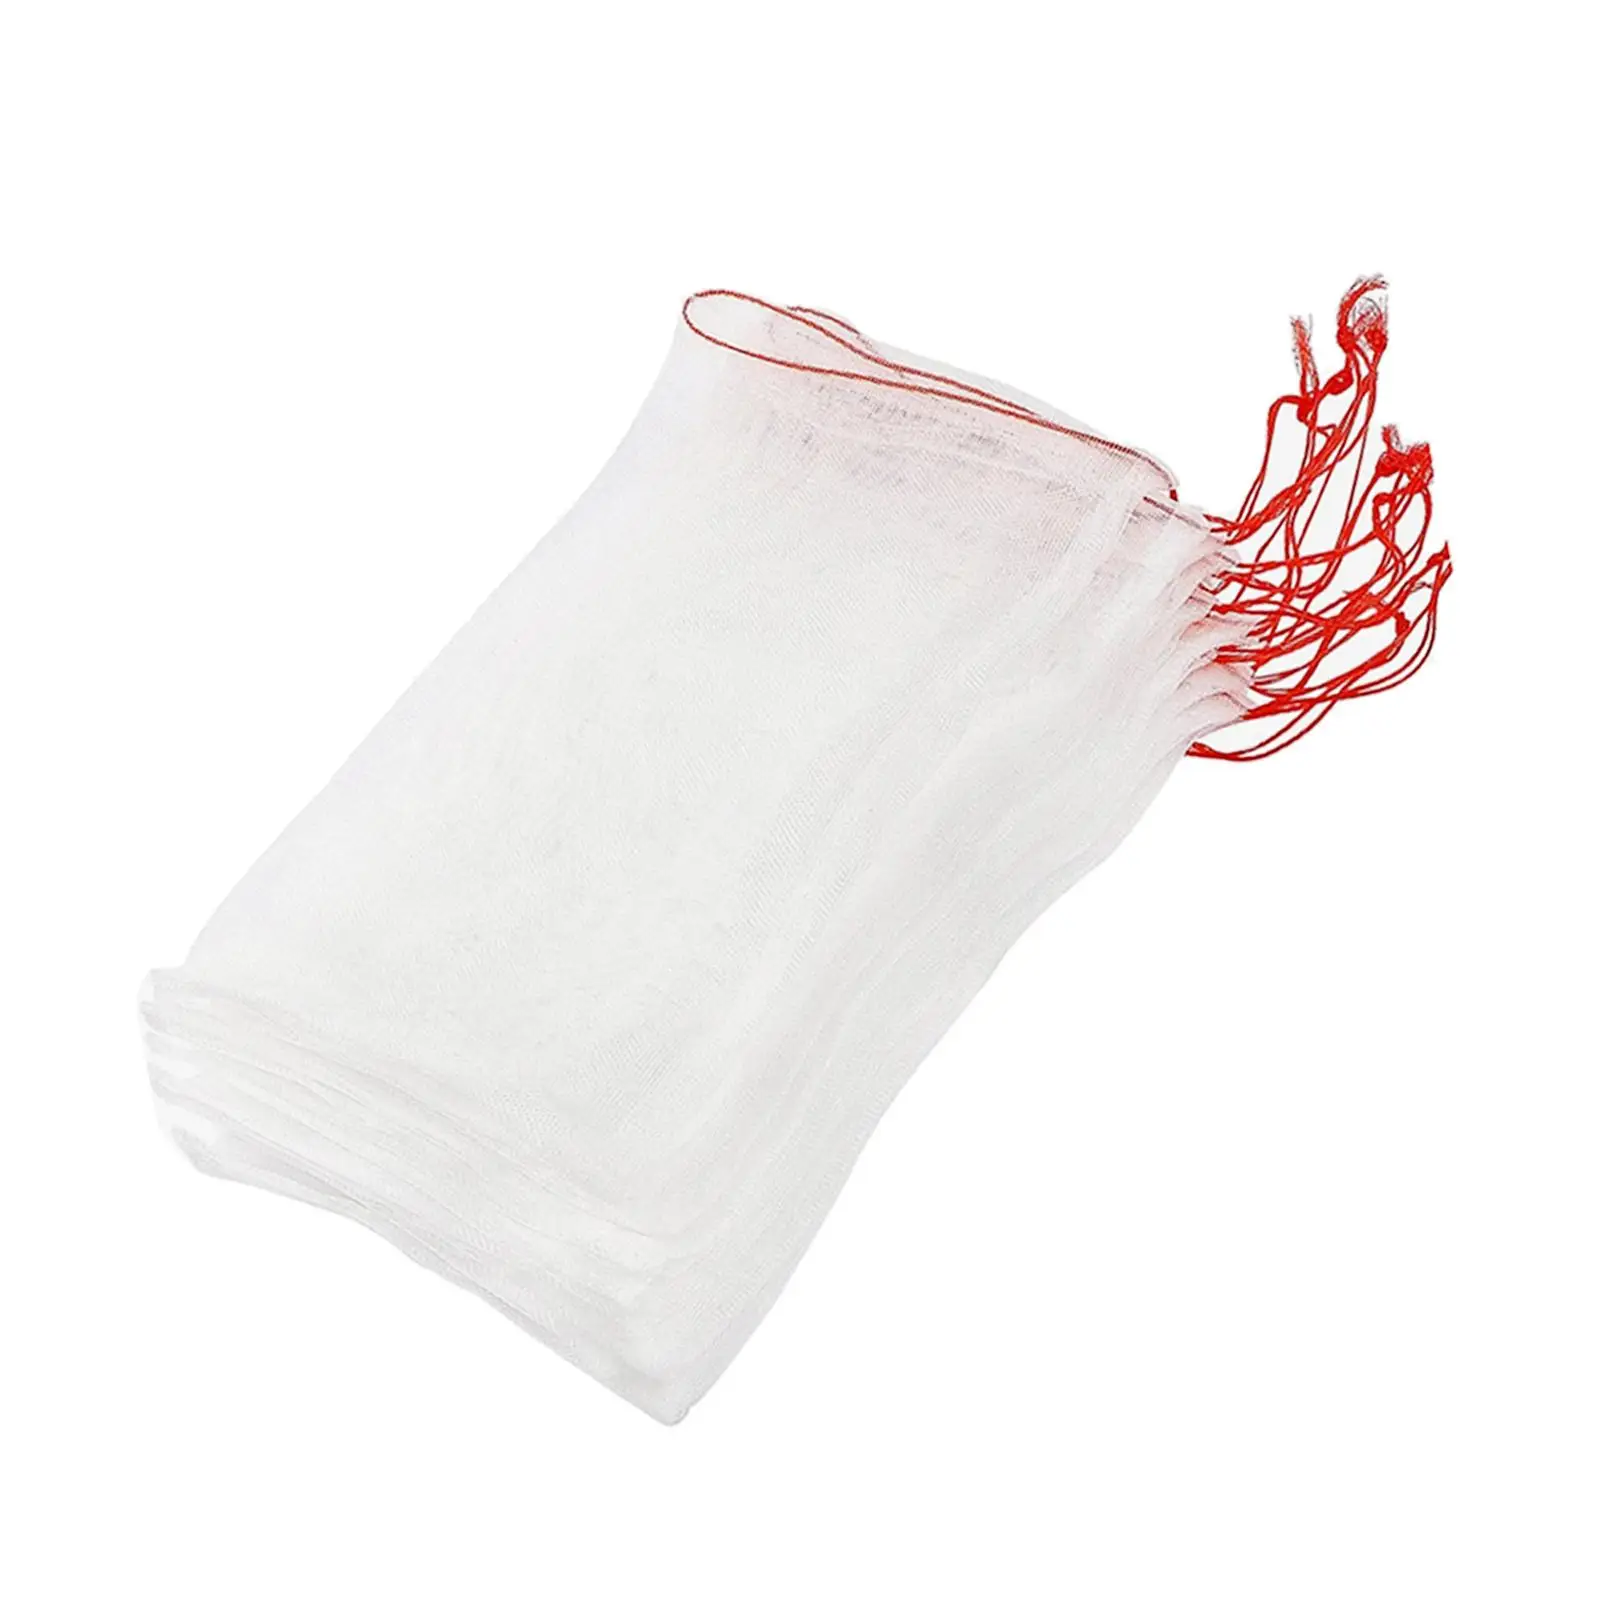 Fruit Protection bags with Drawstring Multifunctional for Vegetables